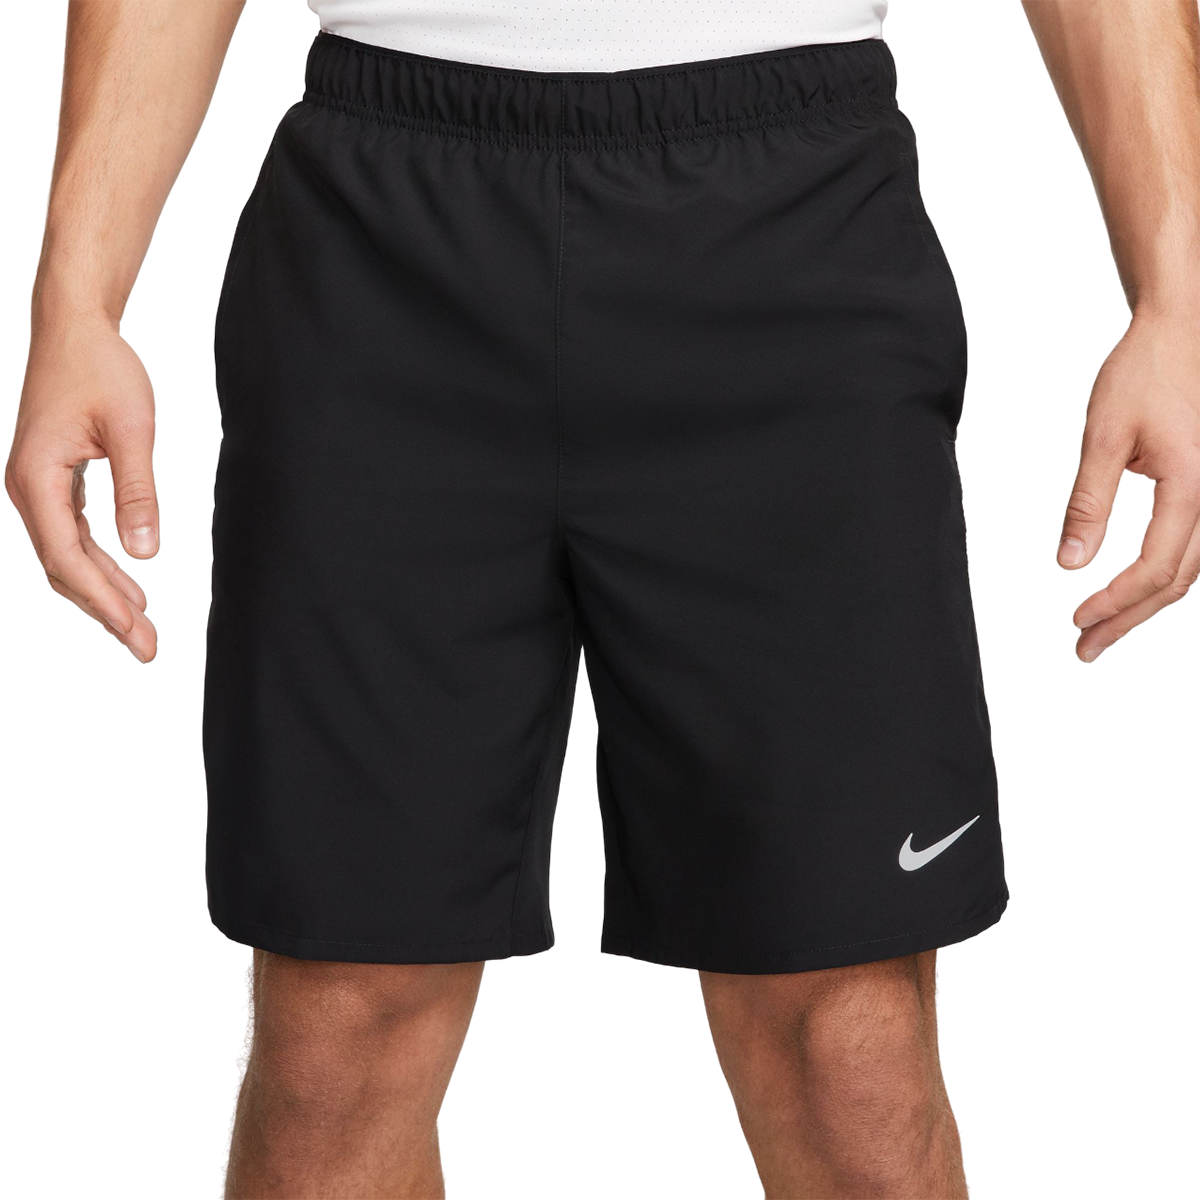 Nike Dri-FIT Challenger 9" Short, , large image number null